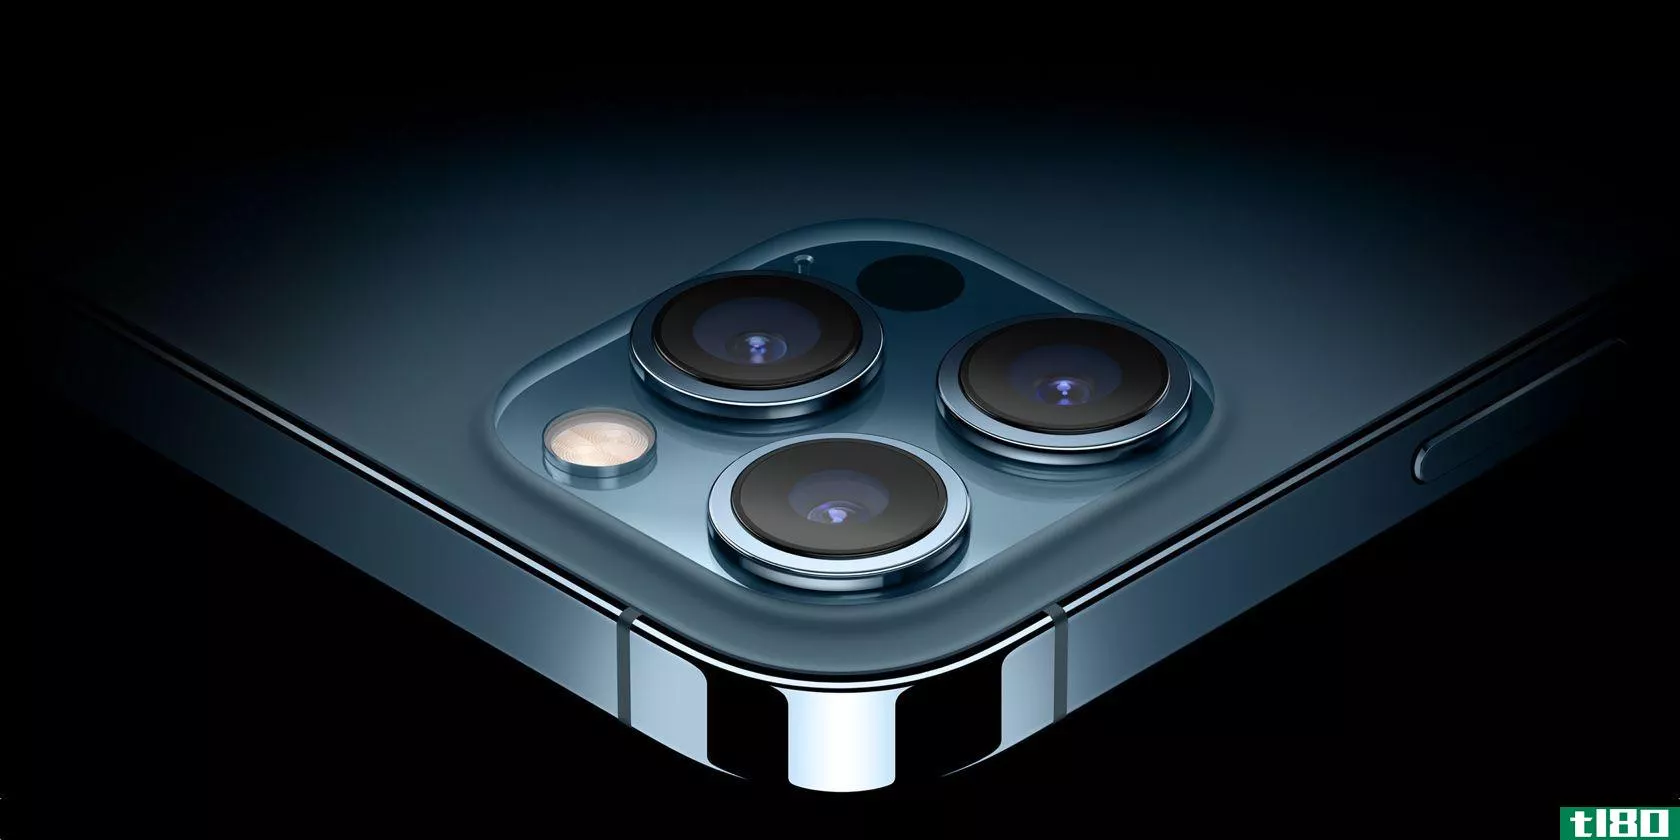 A closeup showing the three rear camera on the Pacific Blue version of the iPhone 12 Pro Max